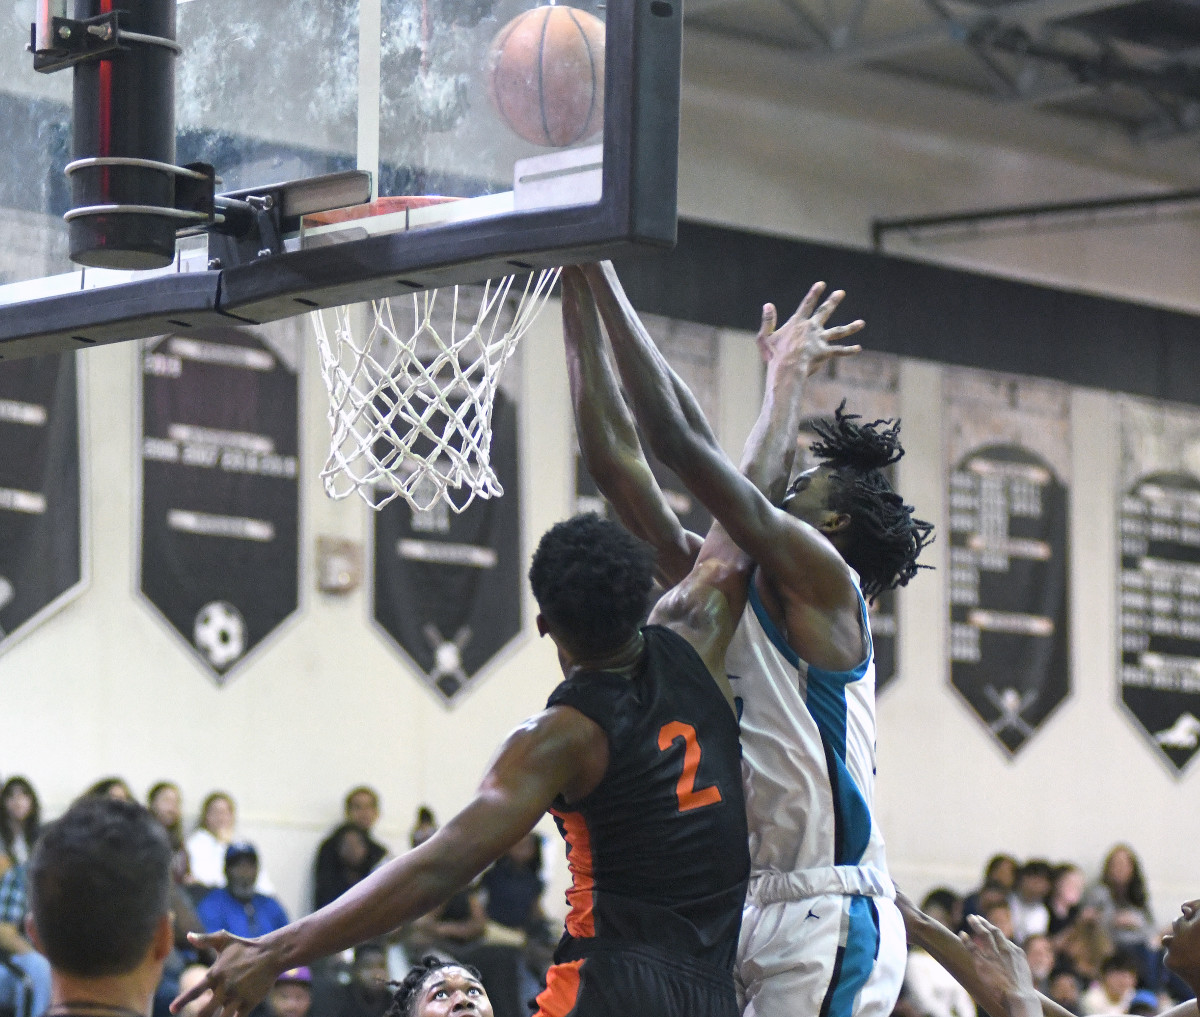 Olympia's Charles Outlaw, right, gets fouled by Leesburg's Camerin James on a dunk attempt in the second quarter. Outlaw had 13 points - including five dunks - and four rebounds for the Titans in their 65-55 victory. James had 14 points and a game-high nine rebounds.